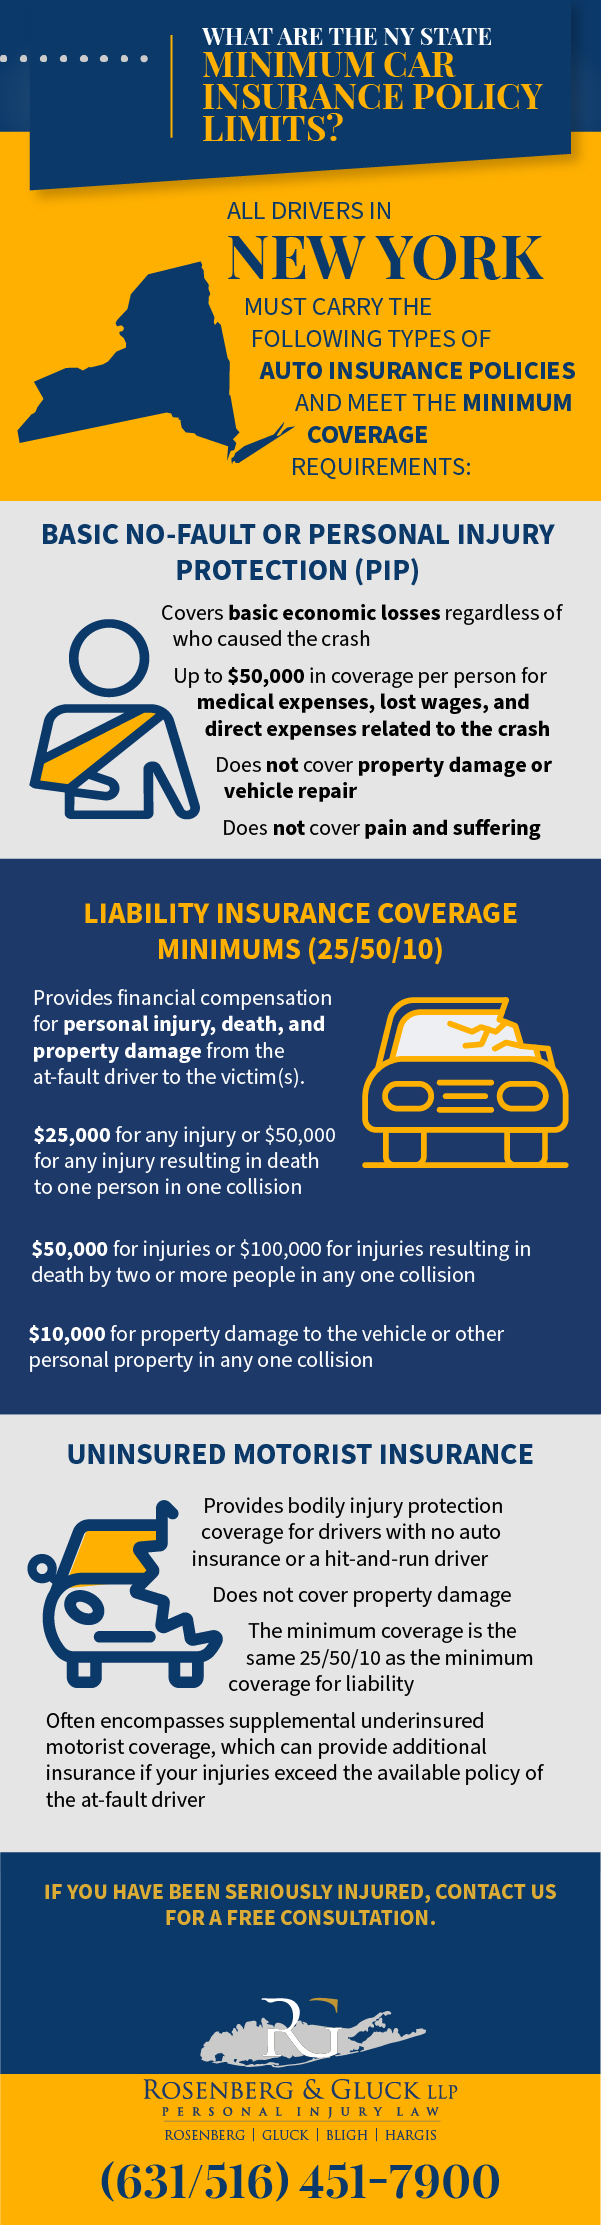 What Are The NY State Minimum Car Insurance Policy Limits?